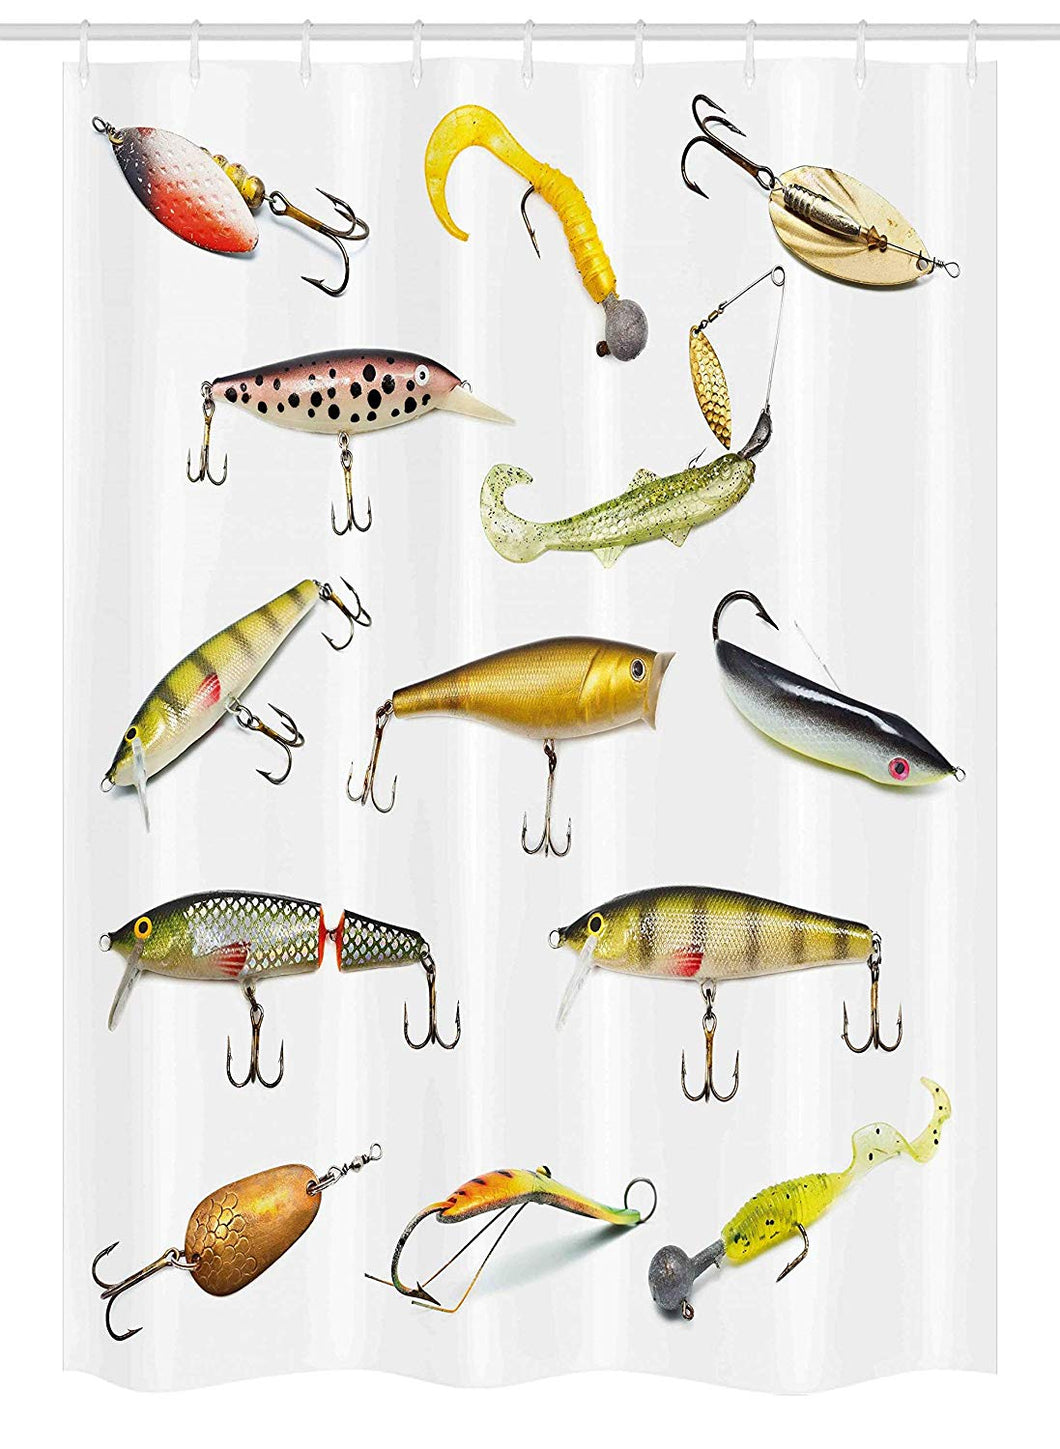 Ambesonne Fishing Decor Stall Shower Curtain, Fishing Tackle Bait for Spearing Trapping Catching Aquatic Animals Molluscs Design, Fabric Bathroom Decor Set with Hooks, 54 W x 78 L Inches, Multi